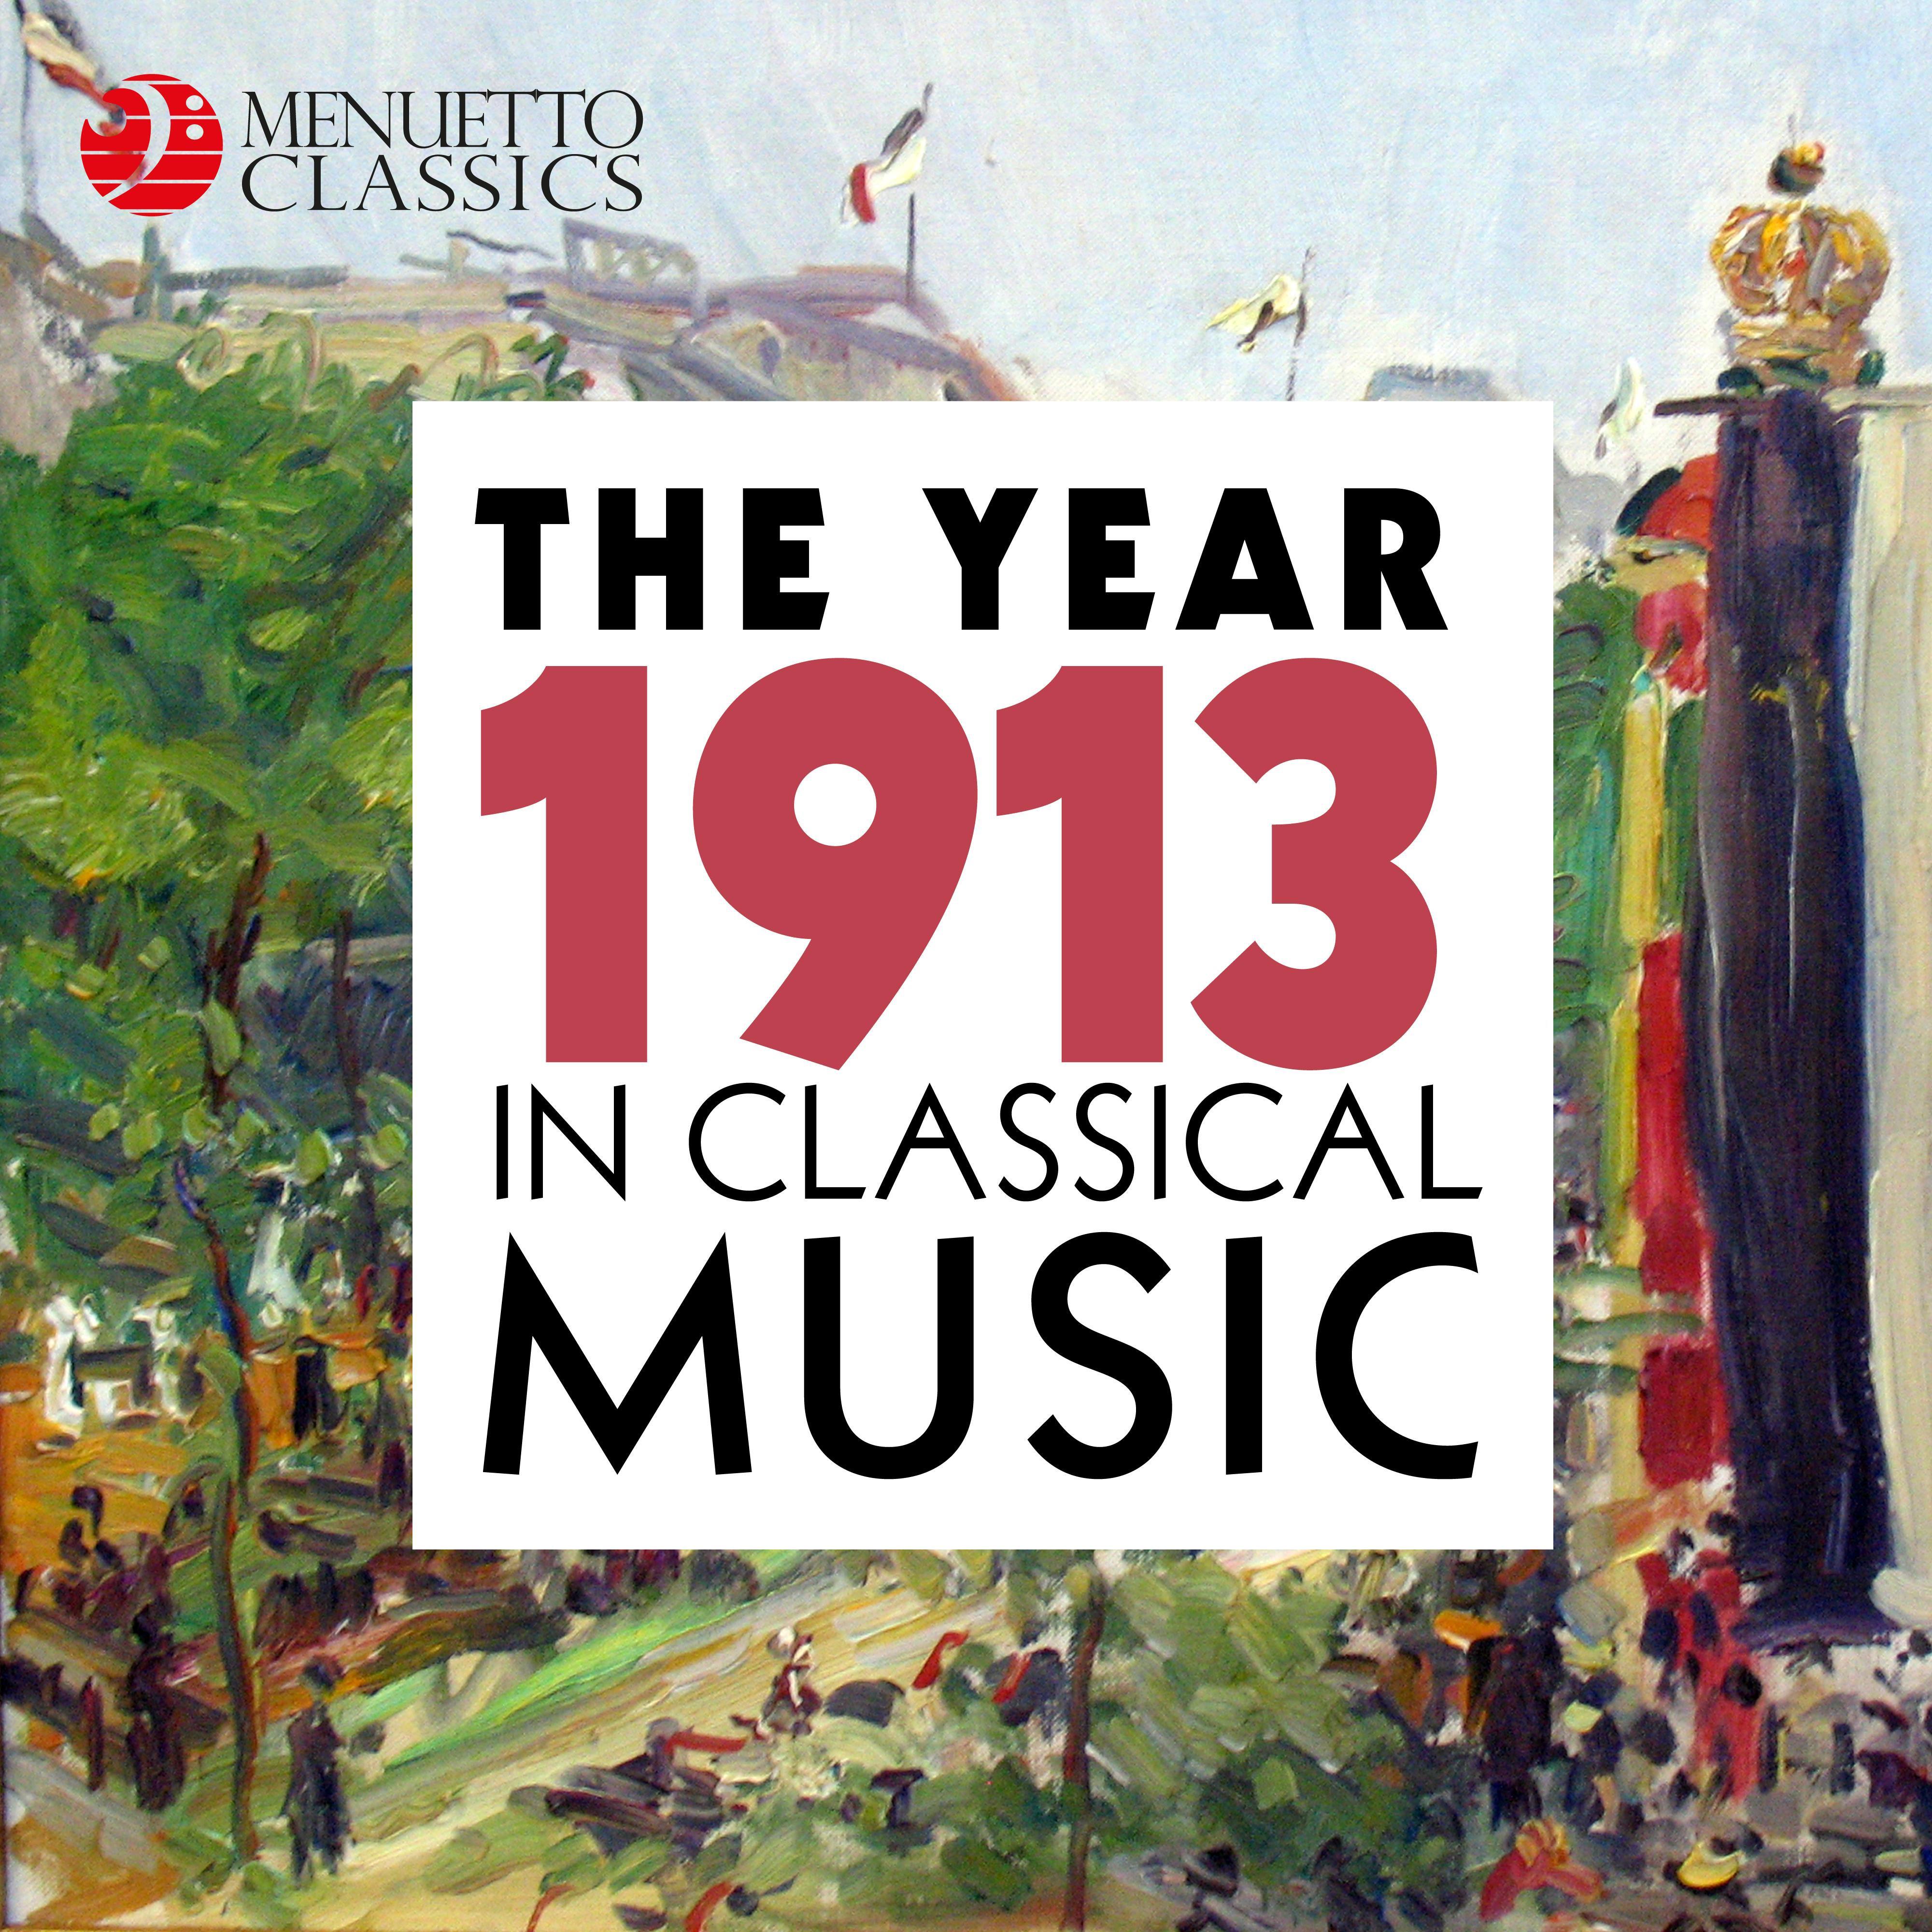 Concerto for Piano and Orchestra No. 2 in G Minor, Op. 16: I. Andante